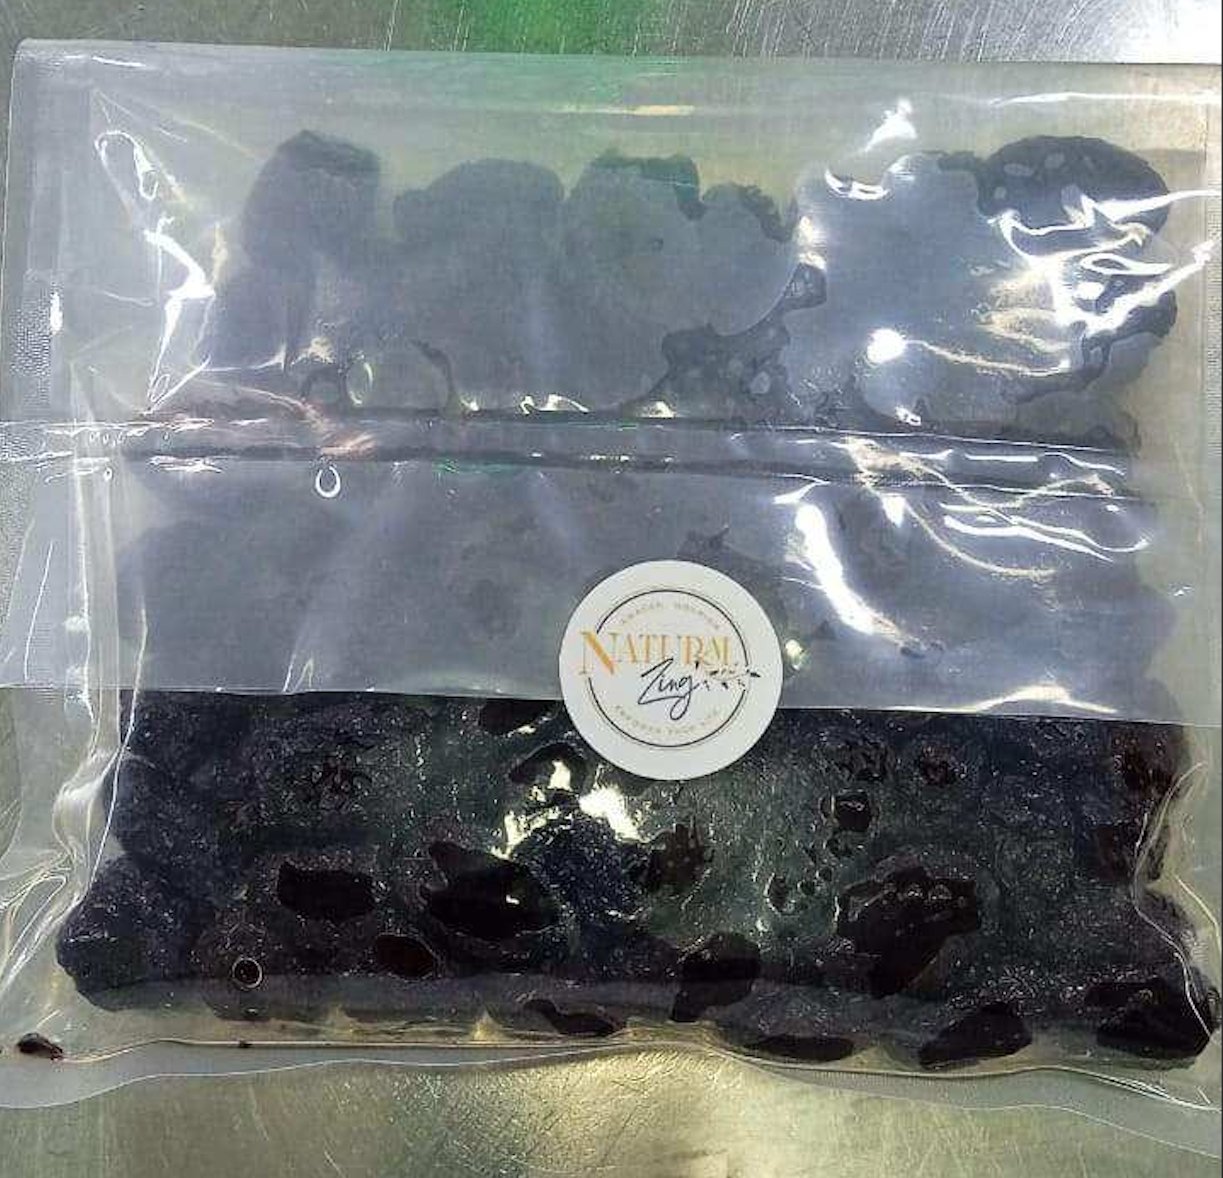 Peruvian Black Dried Olives (Aji Spiced, Pitted) 5oz - Natural Zing